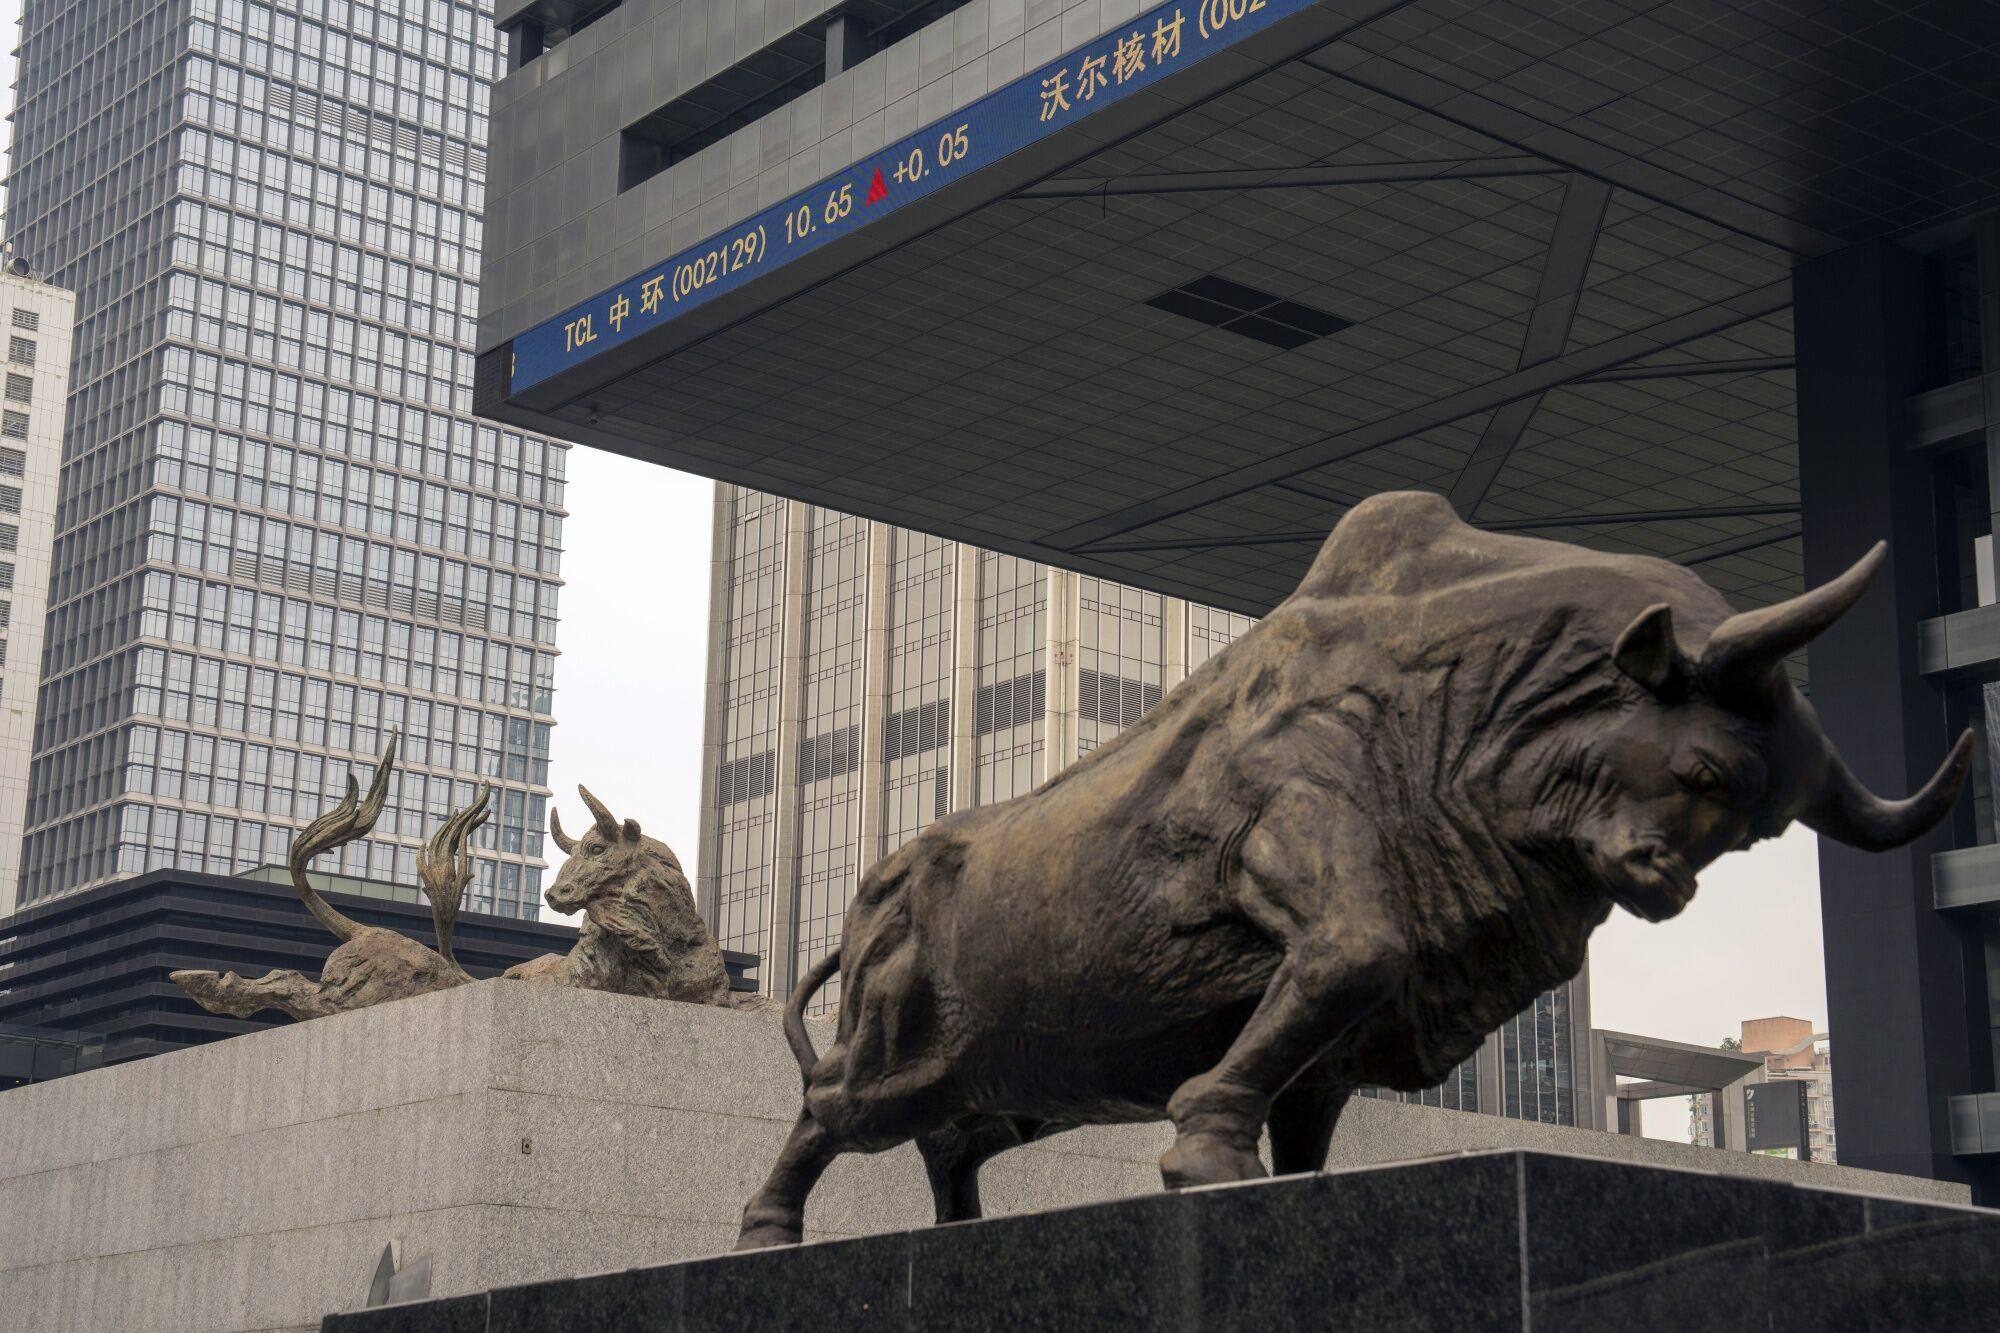 China’s Politburo has reiterated the need for risk control in the country’s financial system, and has presented a method for ensuring accountability among officials and regulators. Photo: Bloomberg